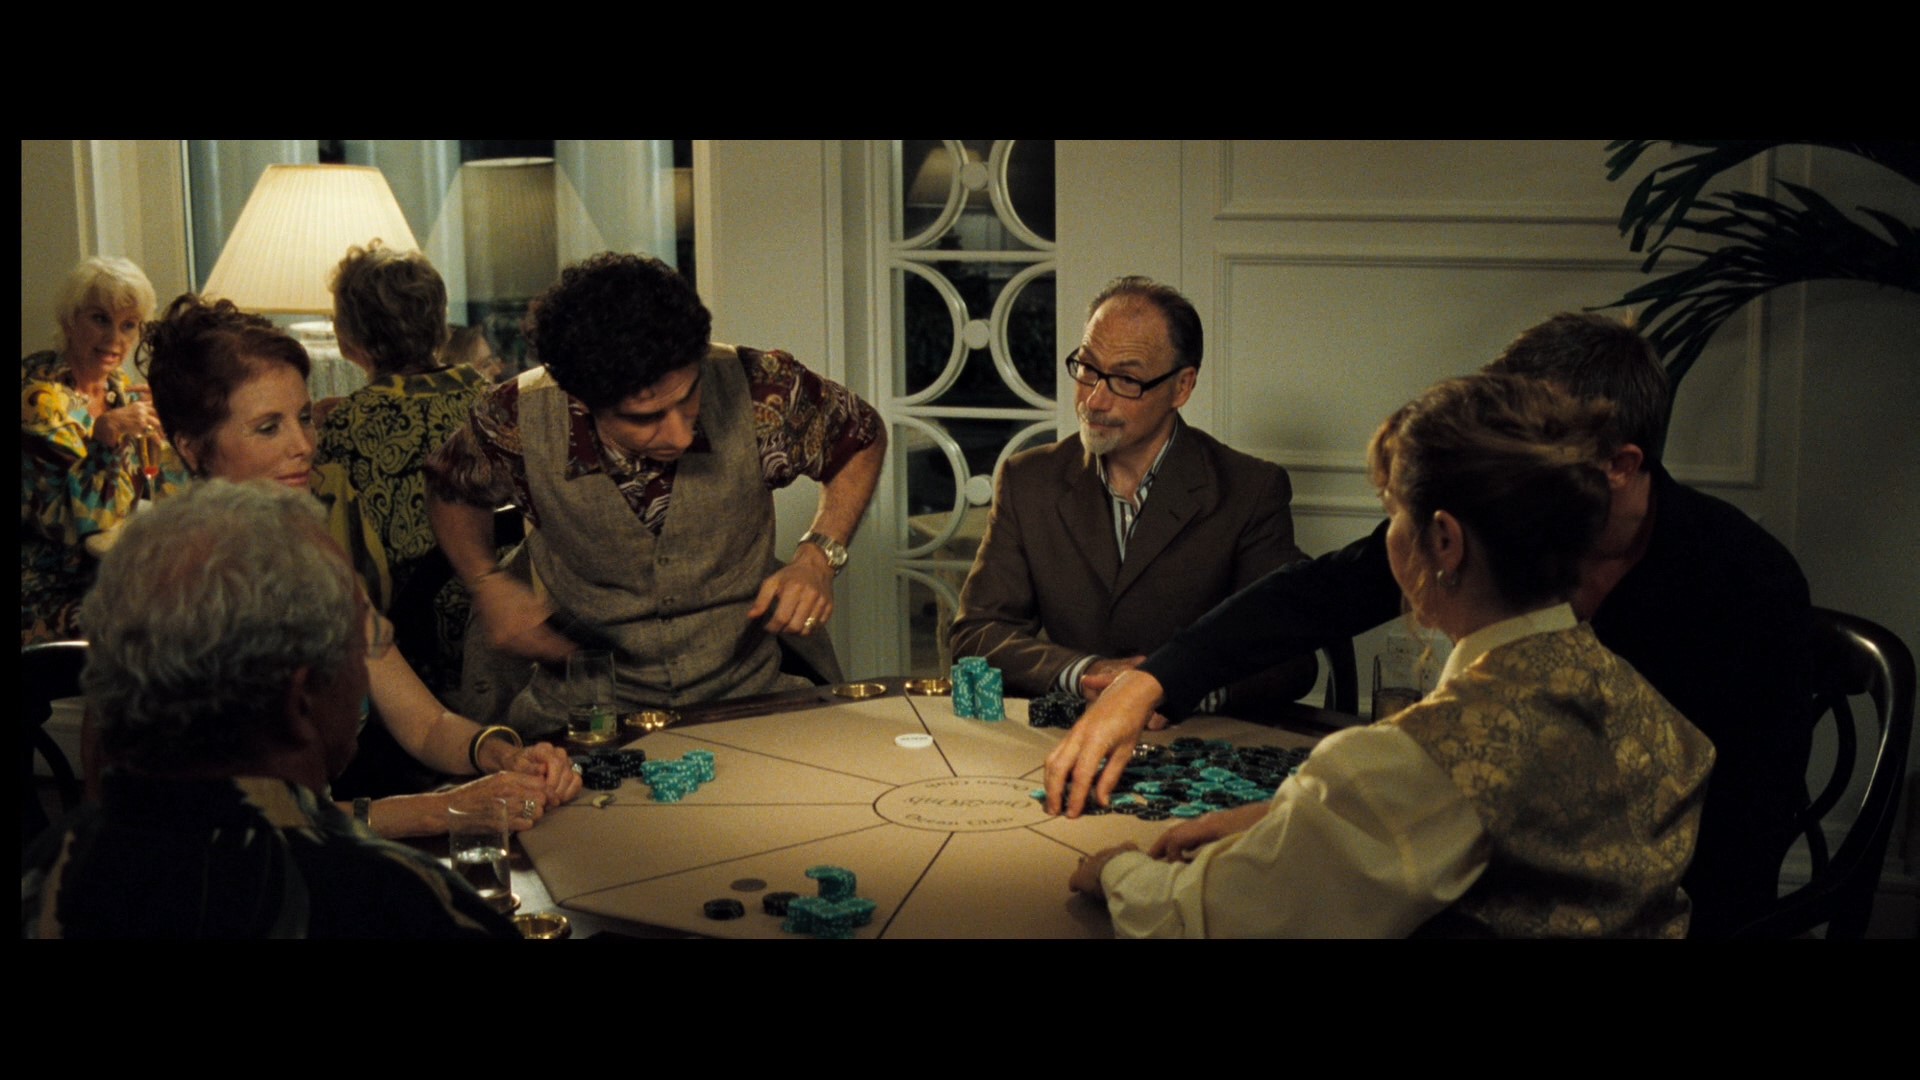 JAMES BOND: CASINO ROYALE (2006) - One & Only Ocean Club Poker Table, Chips and Playing Cards - Image 16 of 16